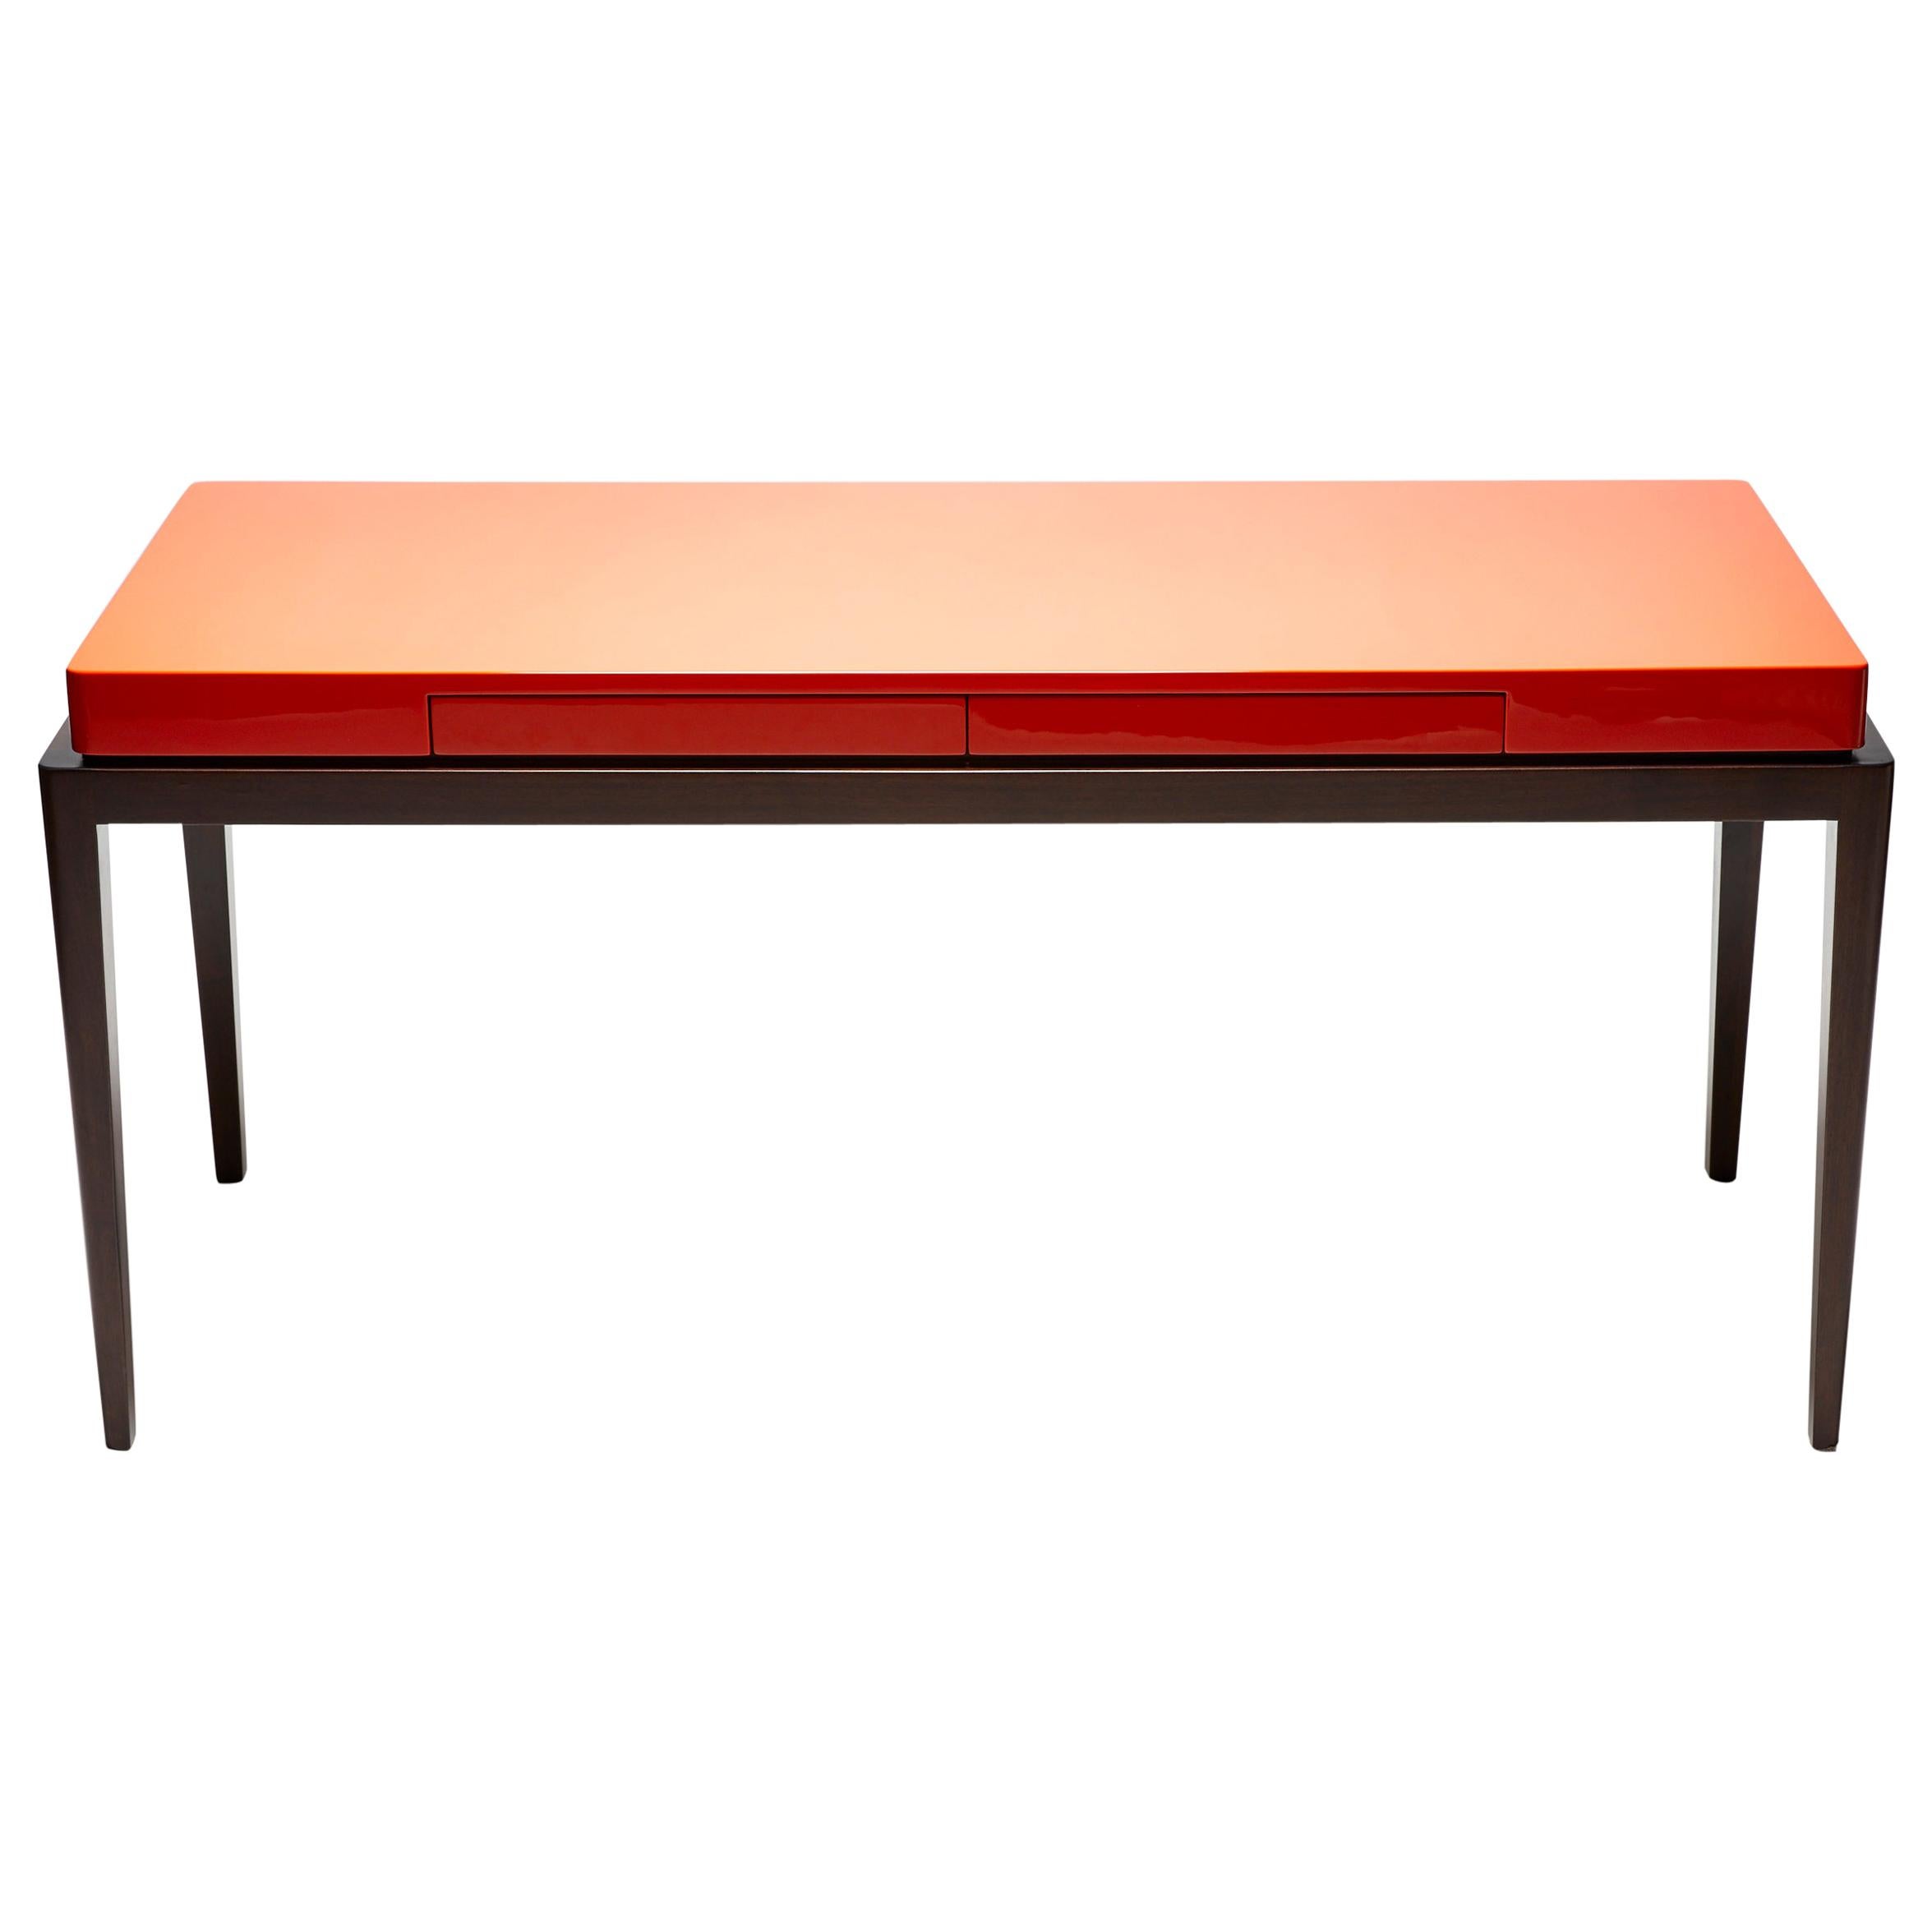 The perfect console; Size: 160cm
Flat surface, smooth, purity of the line only asking to be inhabited. If it is a
console or a desk, TARA is a piece that distinguish itself with the power of its
minimalism. It is enough to dress up any interior. The